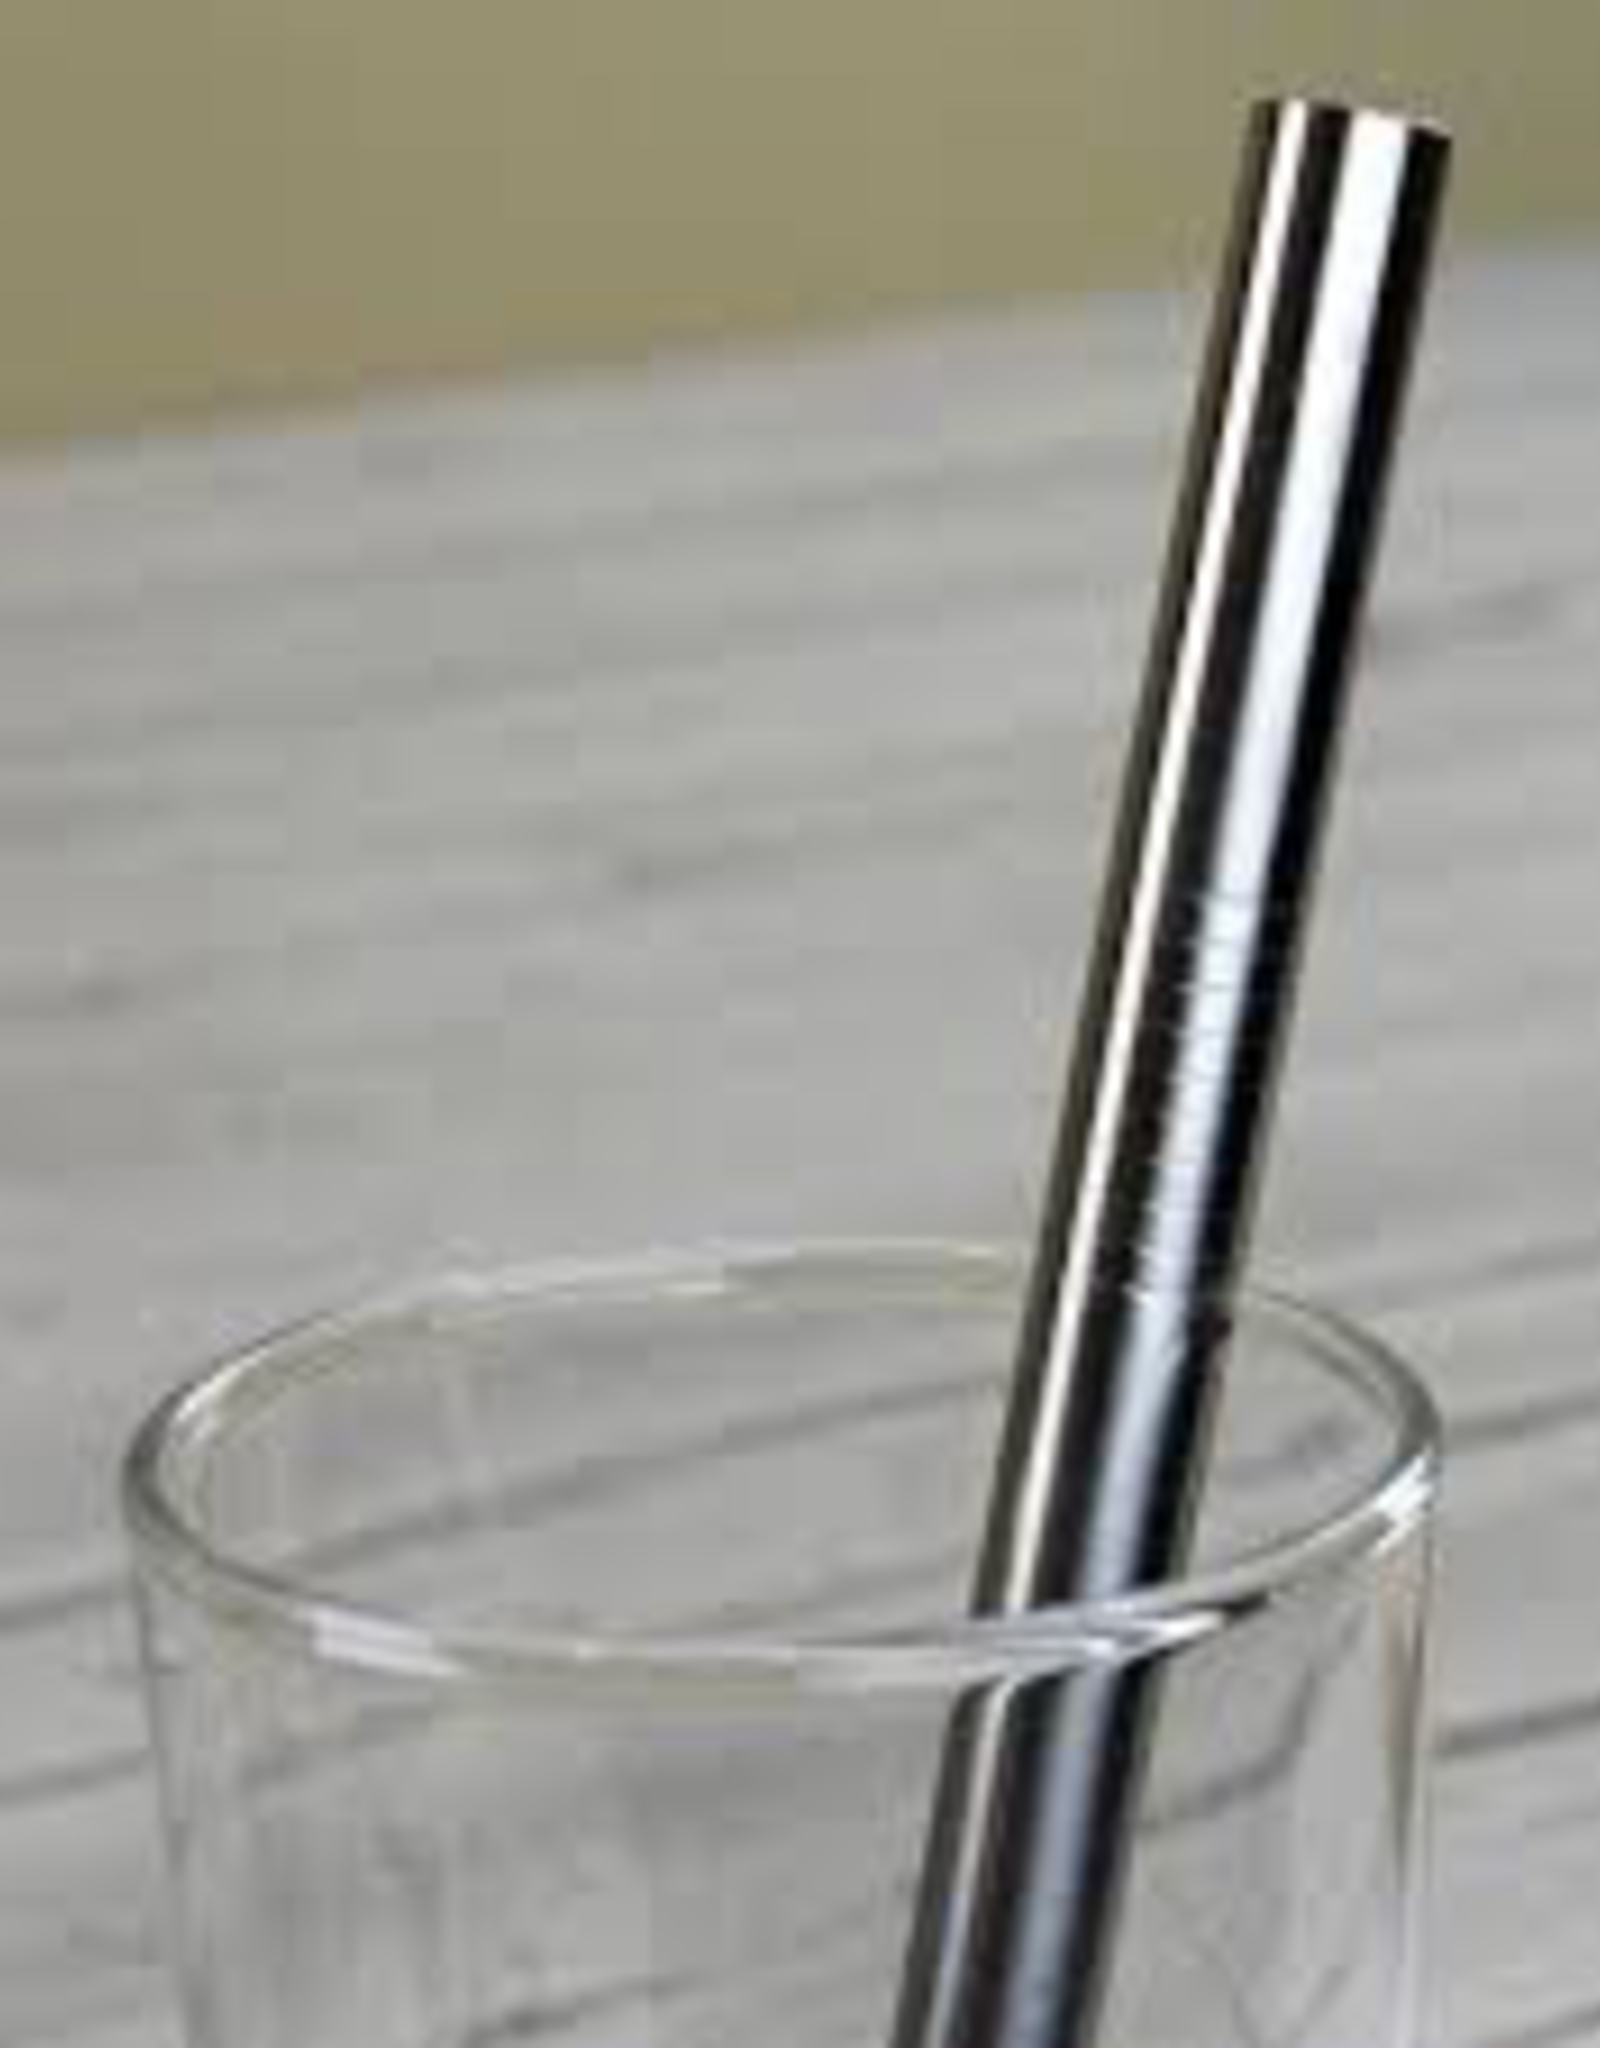 Straw, Stainless, Wide 8mm